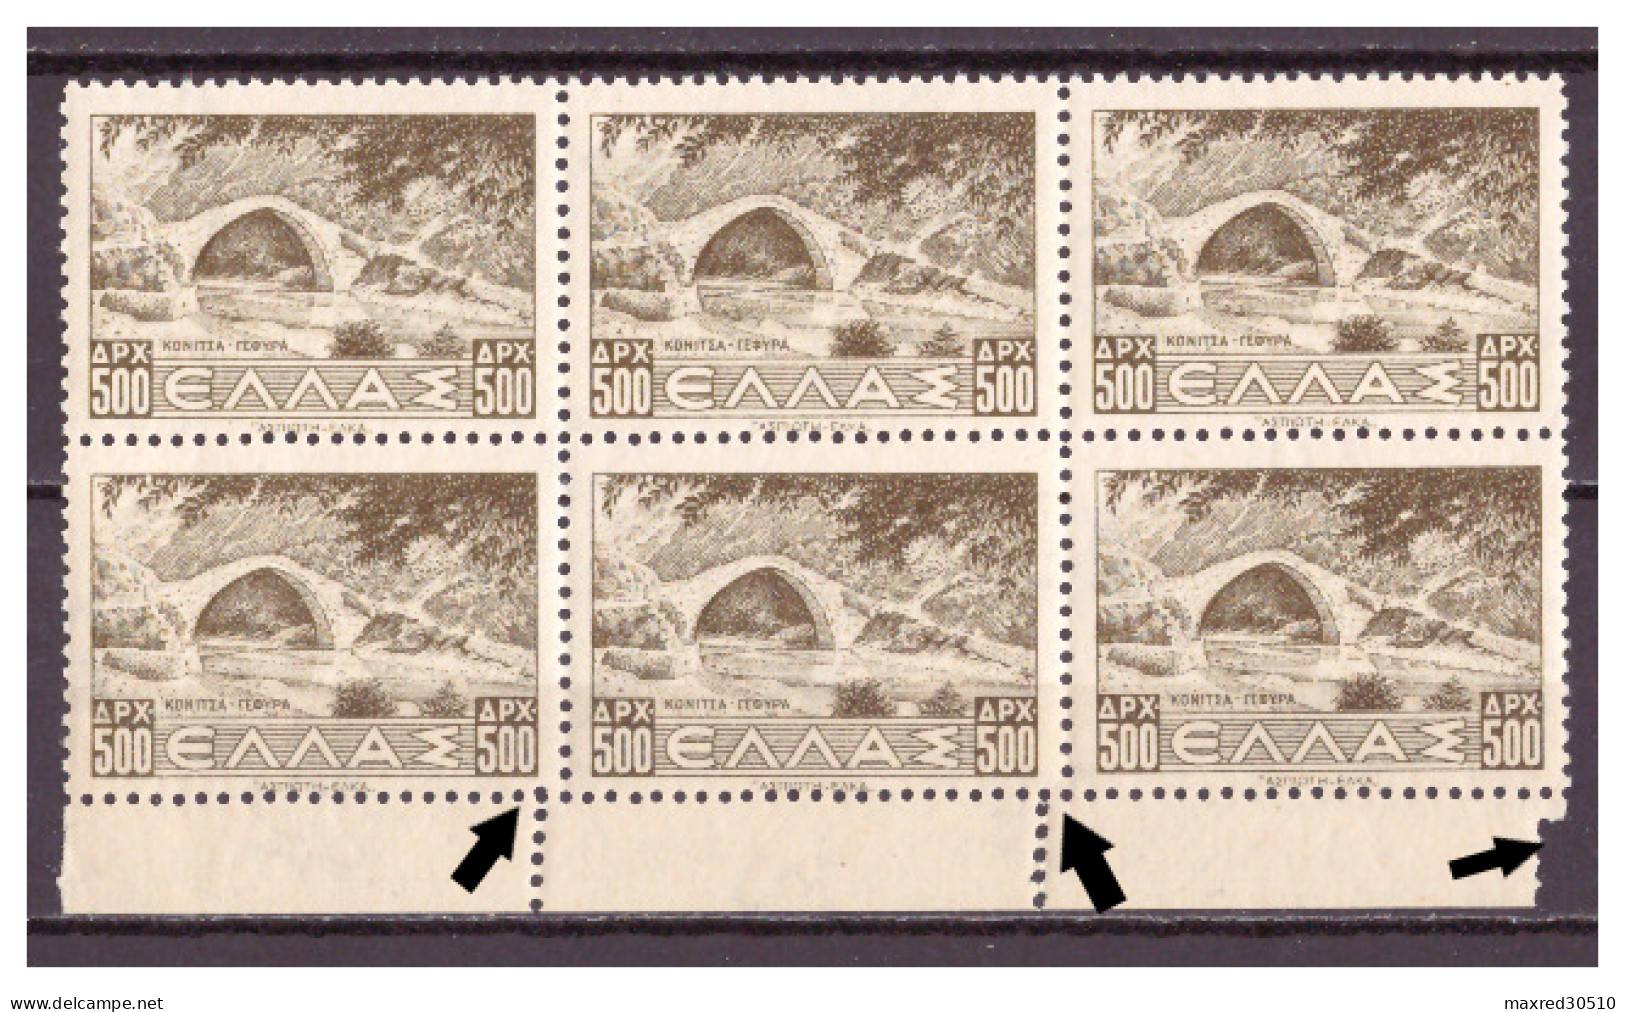 GREECE 1942 - 44 BLOCK OF 6X500DR. OF "LANDSCAPES ISSUE" WITH PRINTING ERRORS AT THE VERTICAL PERFO OF MARGIN SHEET MNH - Variedades Y Curiosidades